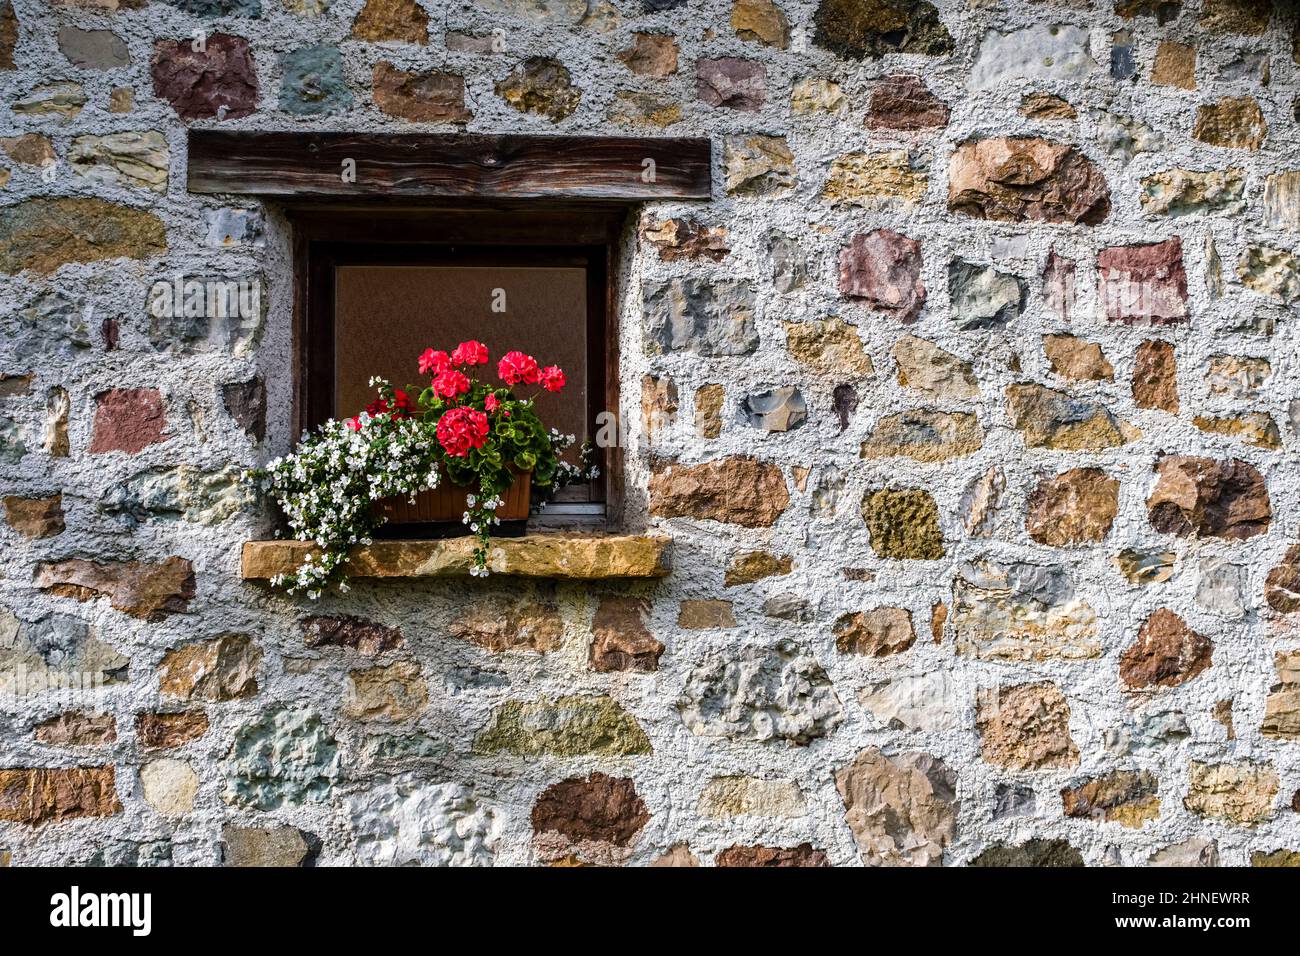 Blooming flowers in a little window in the stone wall of a farmers house at Seiser Alm. Stock Photo